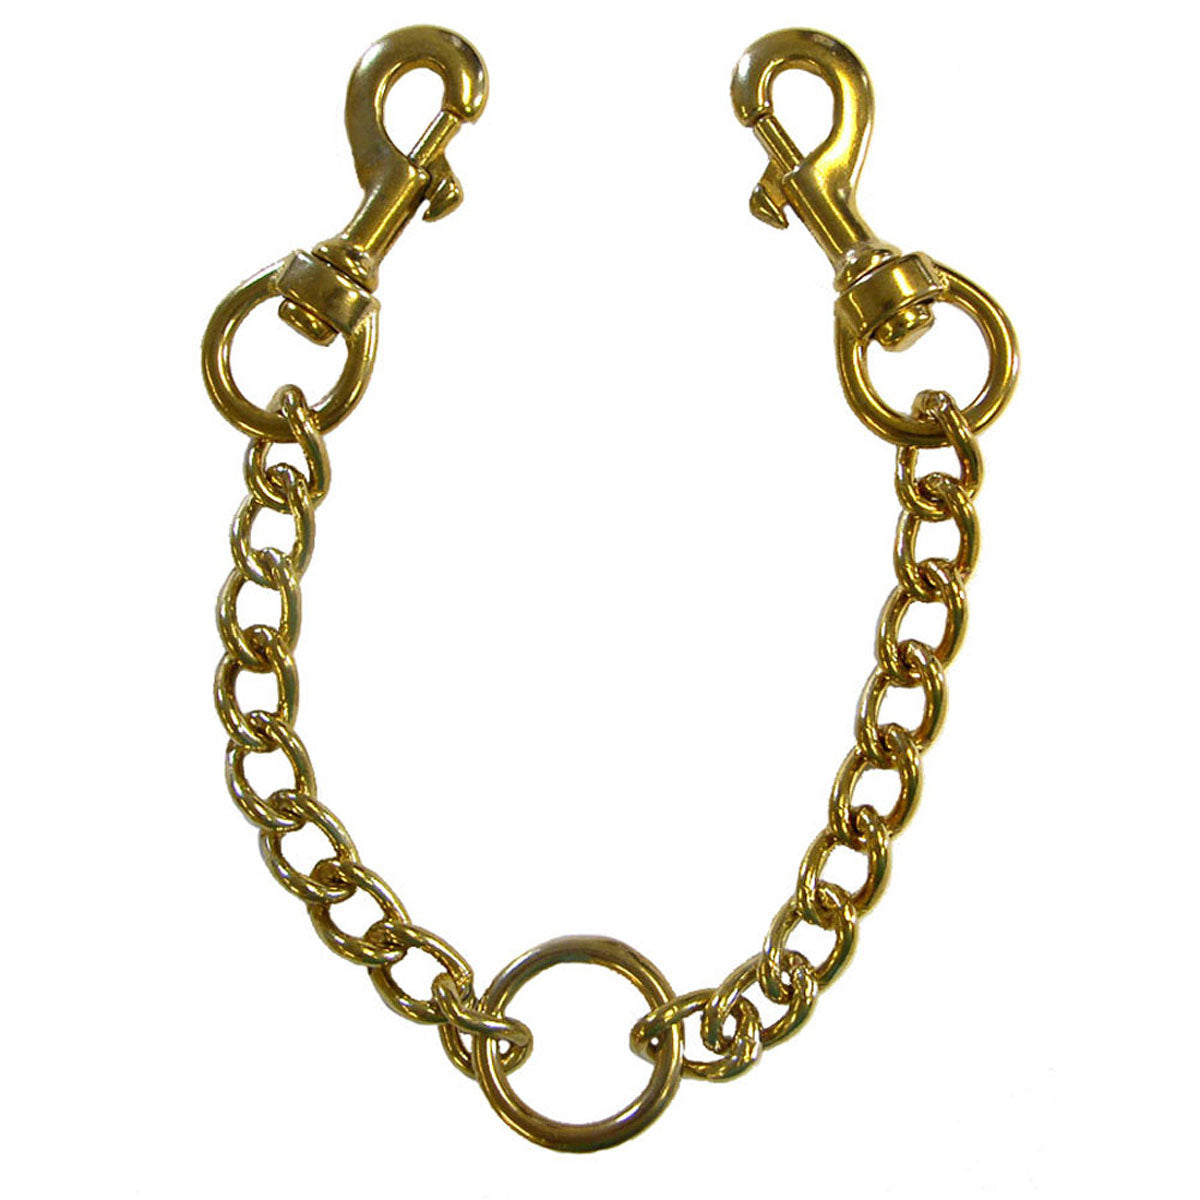 Solid Brass Newmarket Coupling Chain 5"